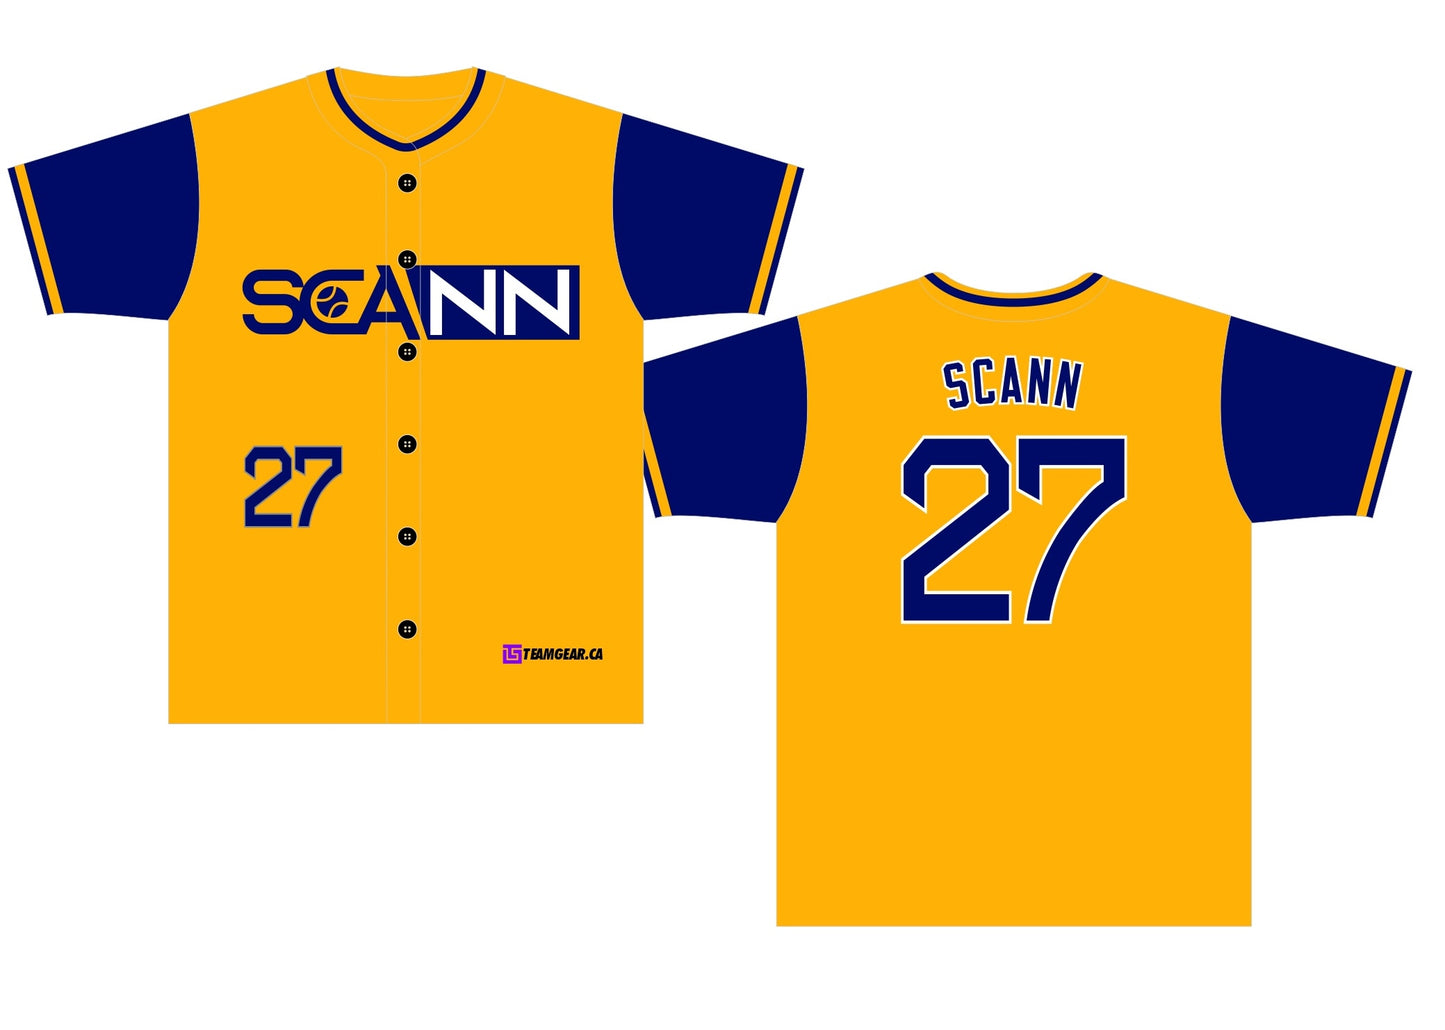 ShowZone creator custom jersey for Scann in yellow and navy blue